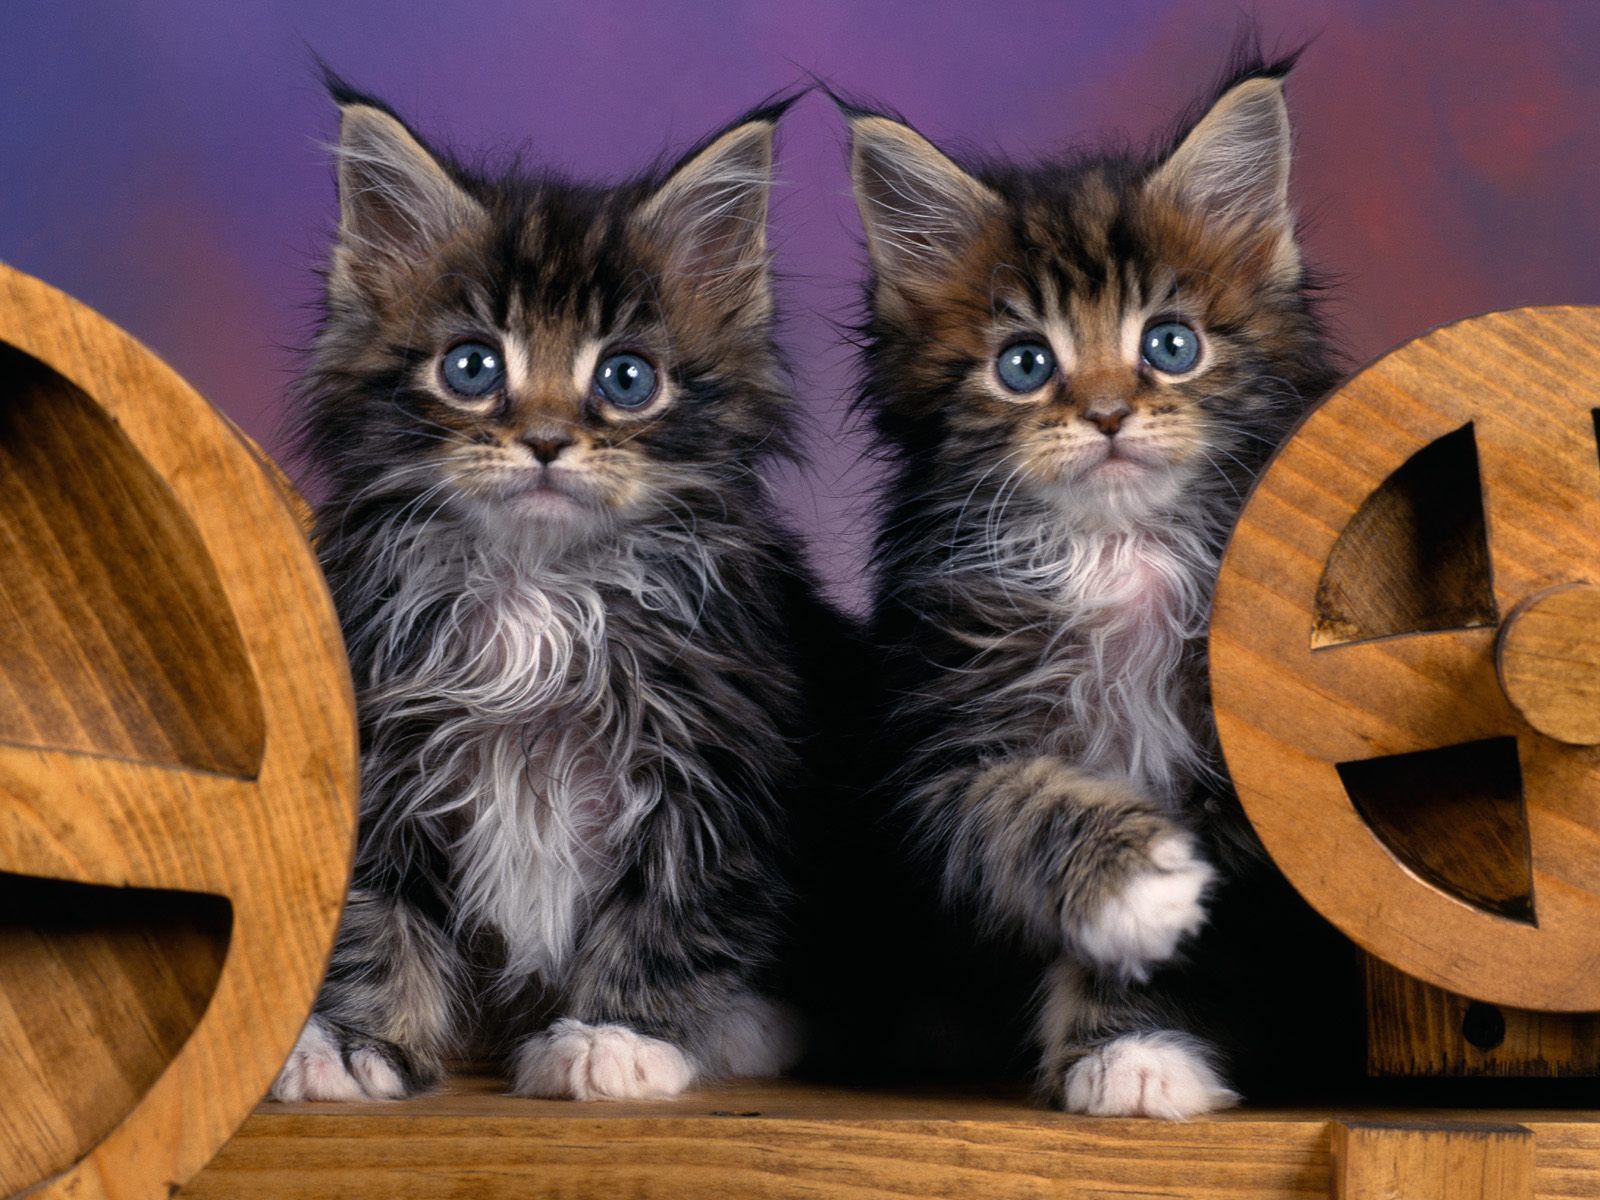 Free HQ Maine Coon Kittens 1 Wallpaper   Free HQ Wallpapers